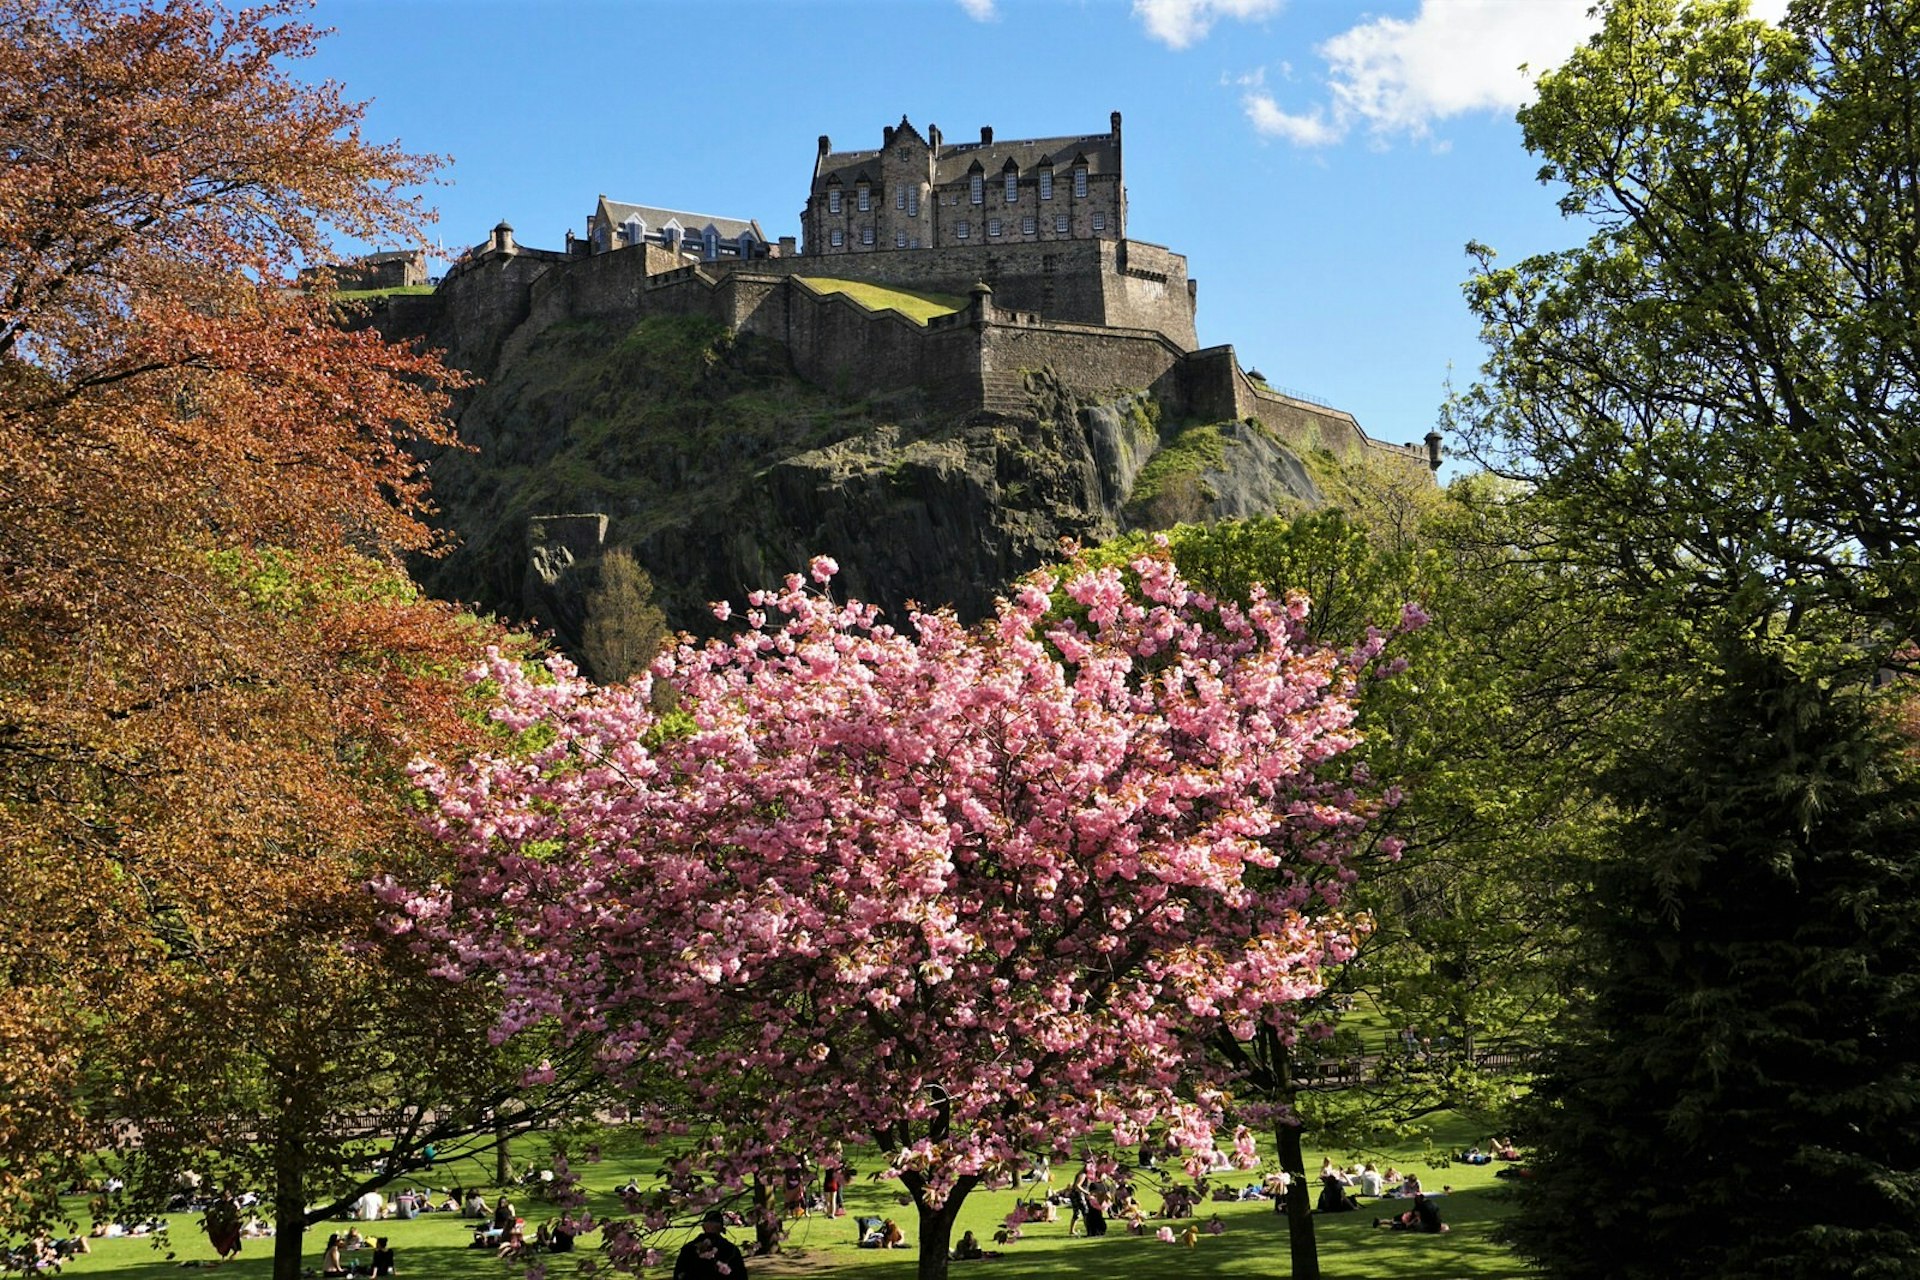 Edinburgh Castle with some spring cherry blossom in the park beneath it.